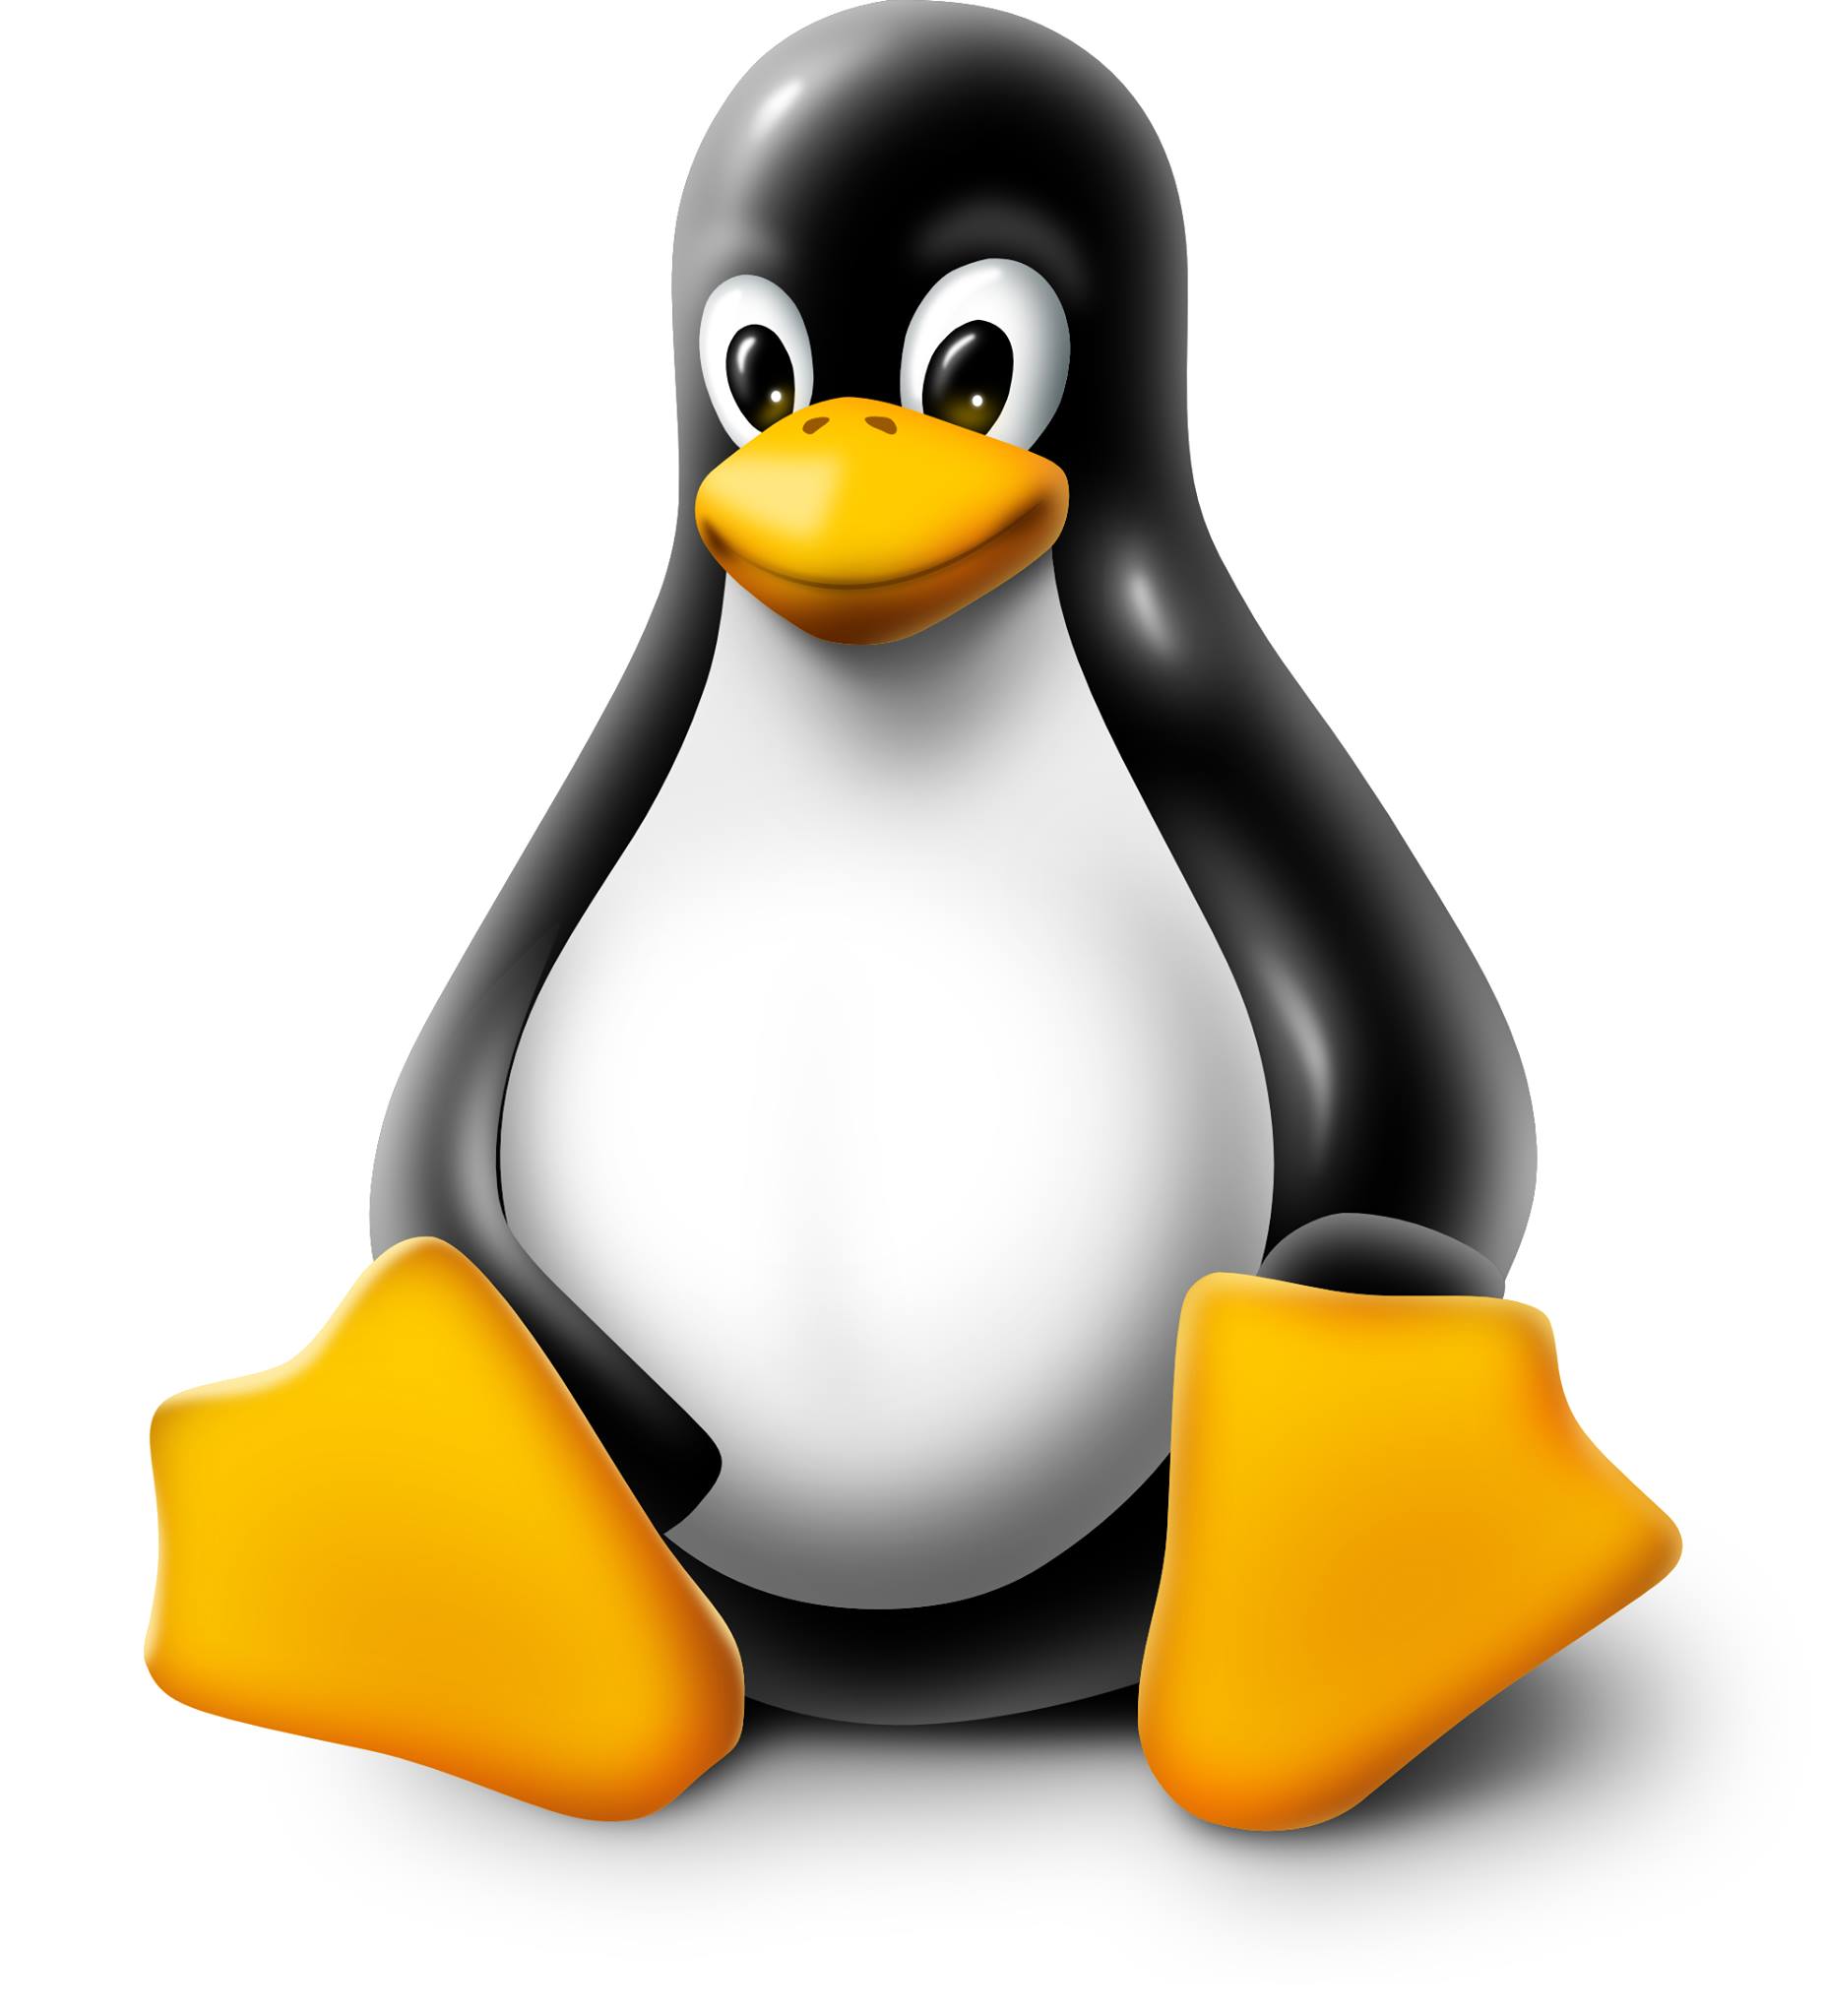 Google is working on Experimental Linux Kernel 3.10 for Android